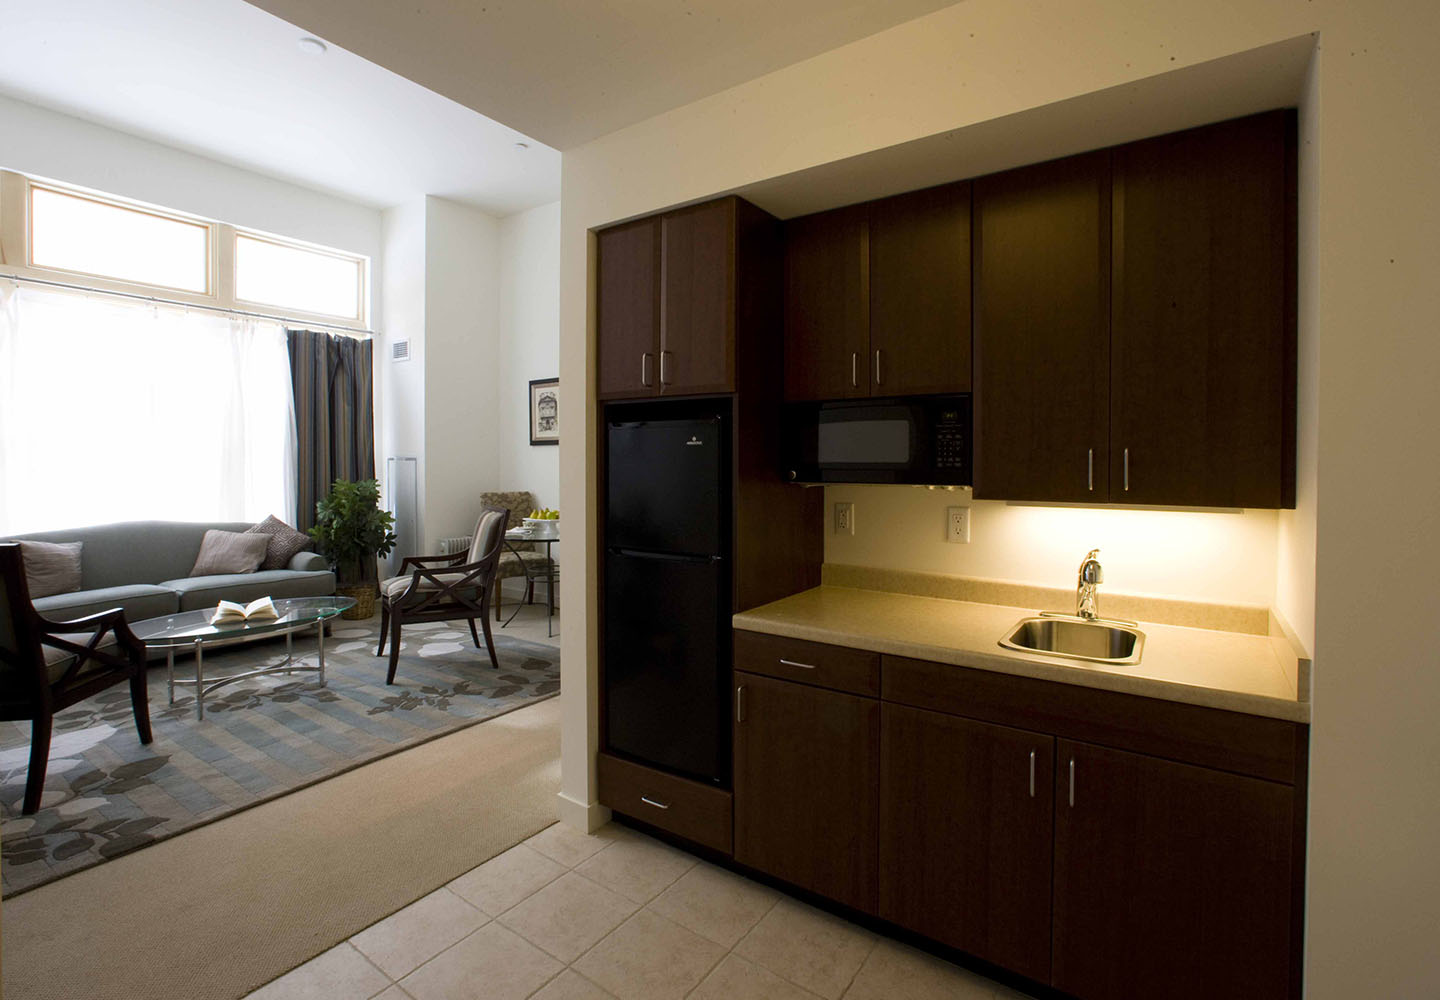 A kitchenette opens to a sunny living room in an assisted living apartment at NewBridge on the Charles.